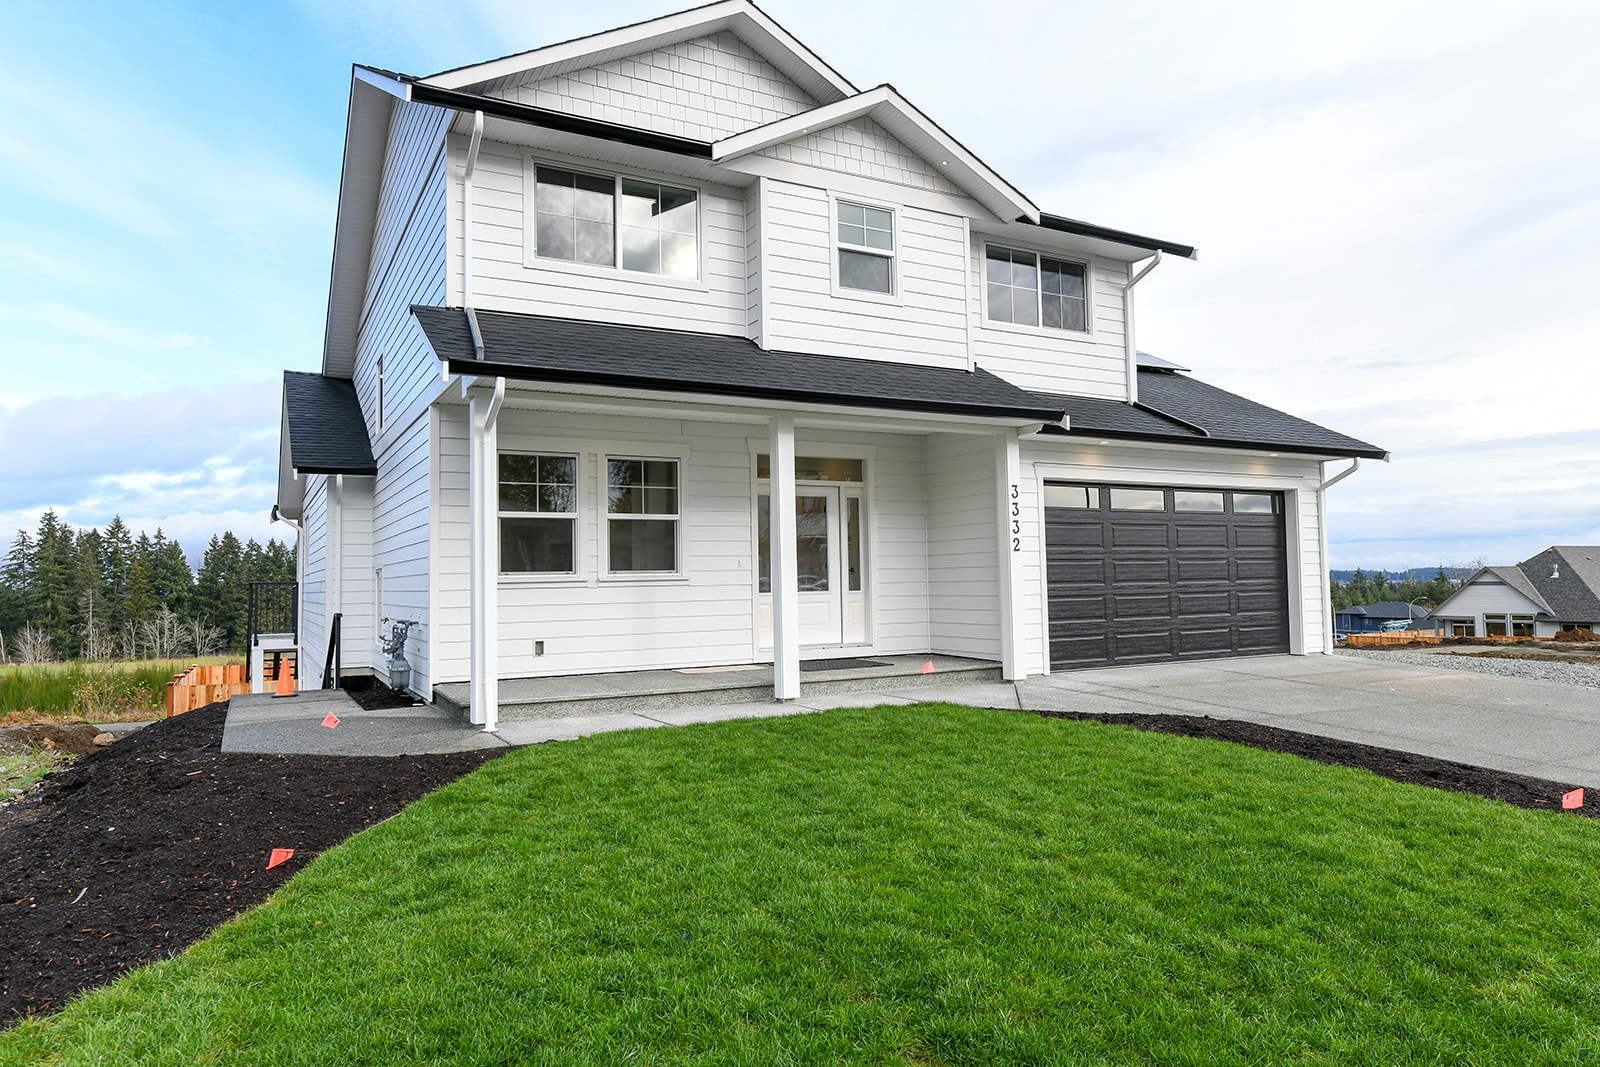 Are You Looking for a Custom Home Builder in the Comox Valley, BC?